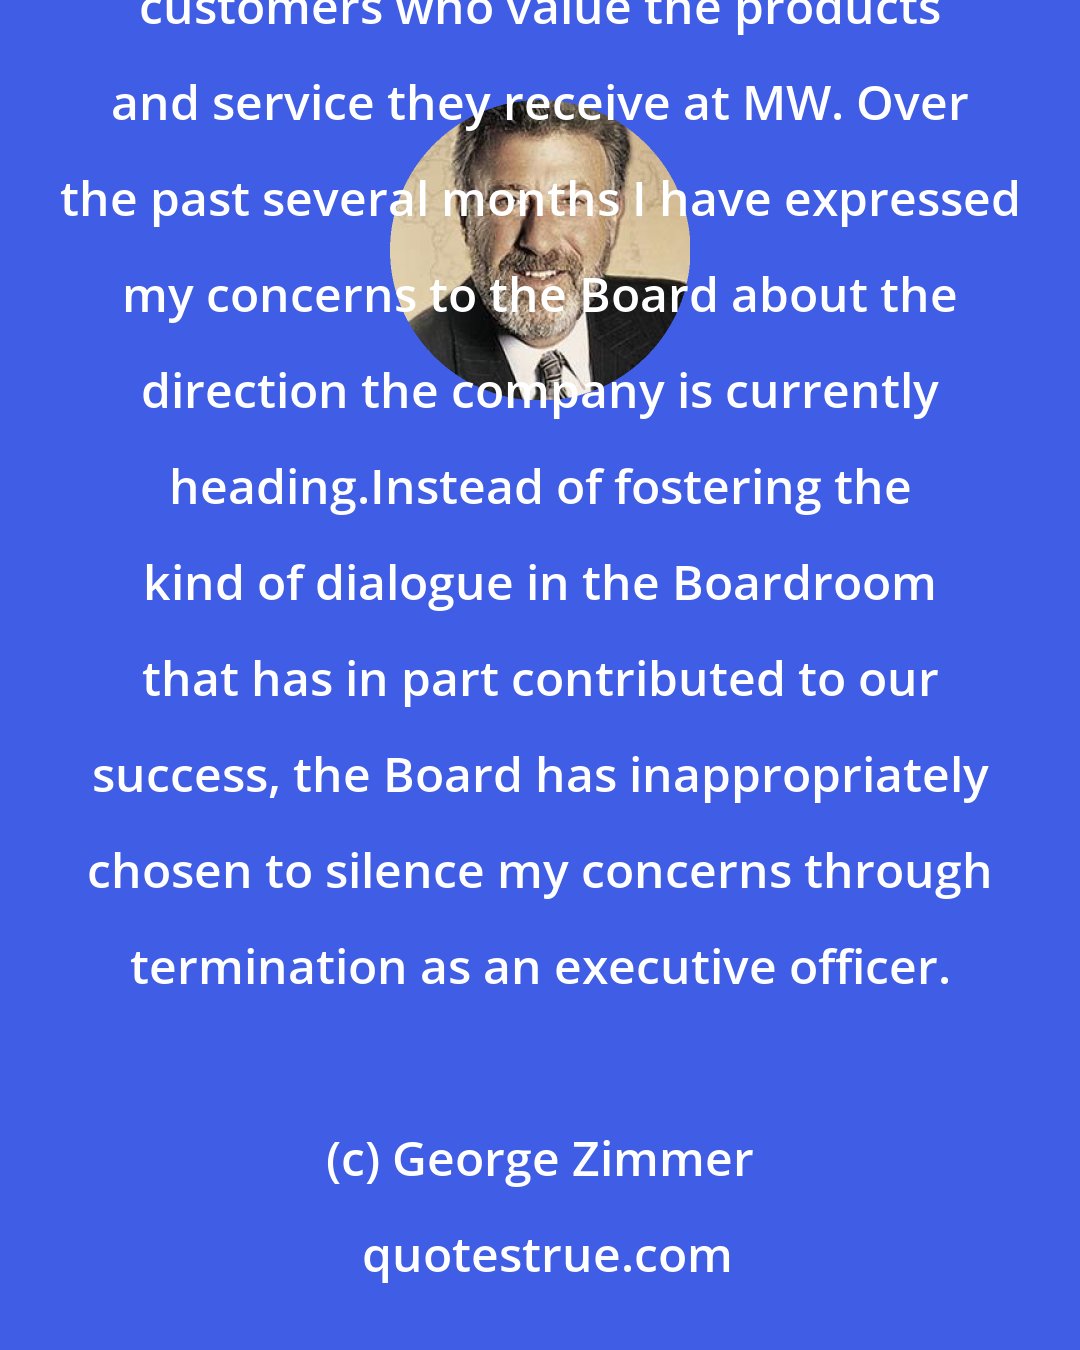 George Zimmer: Over the last 40 years, I have built MW into a multi-billion dollar company with amazing employees and loyal customers who value the products and service they receive at MW. Over the past several months I have expressed my concerns to the Board about the direction the company is currently heading.Instead of fostering the kind of dialogue in the Boardroom that has in part contributed to our success, the Board has inappropriately chosen to silence my concerns through termination as an executive officer.